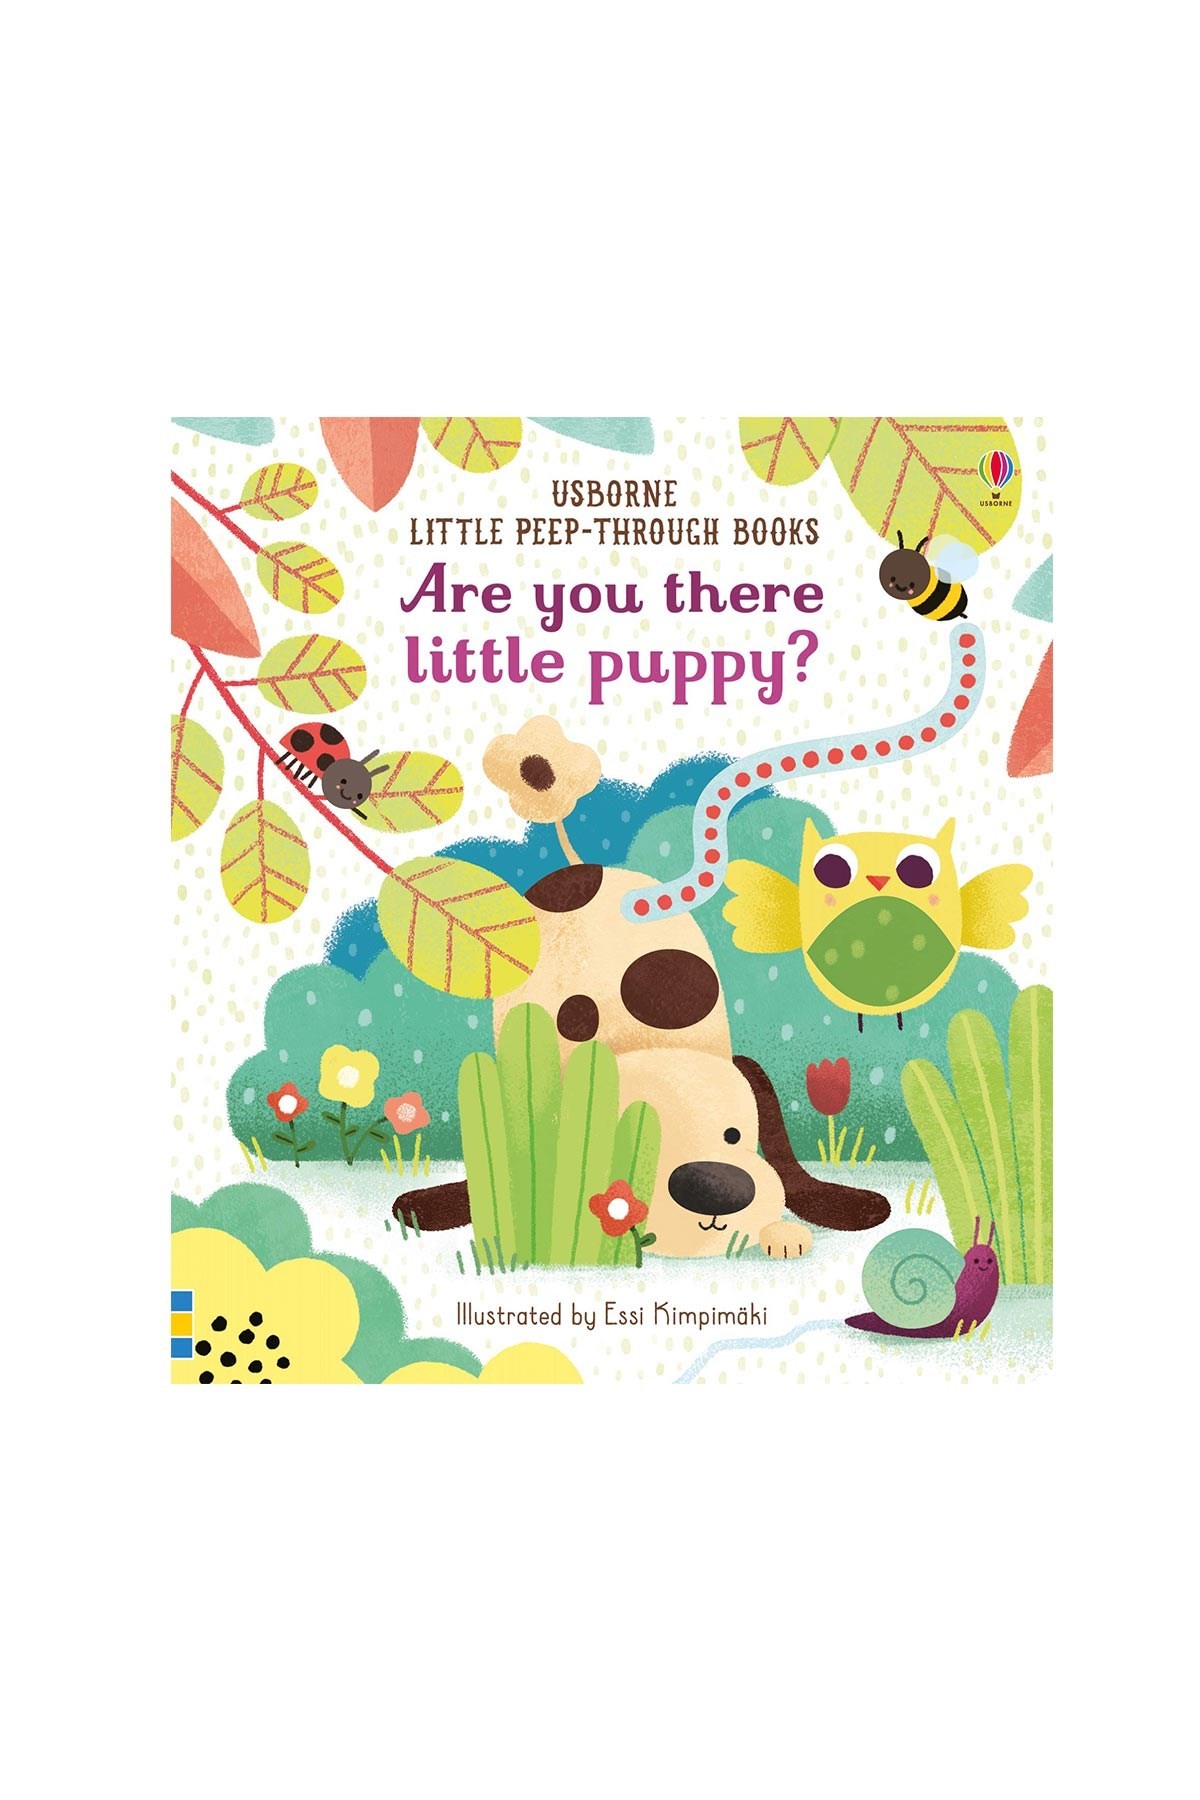 The Usborne Are You There Little Puppy?